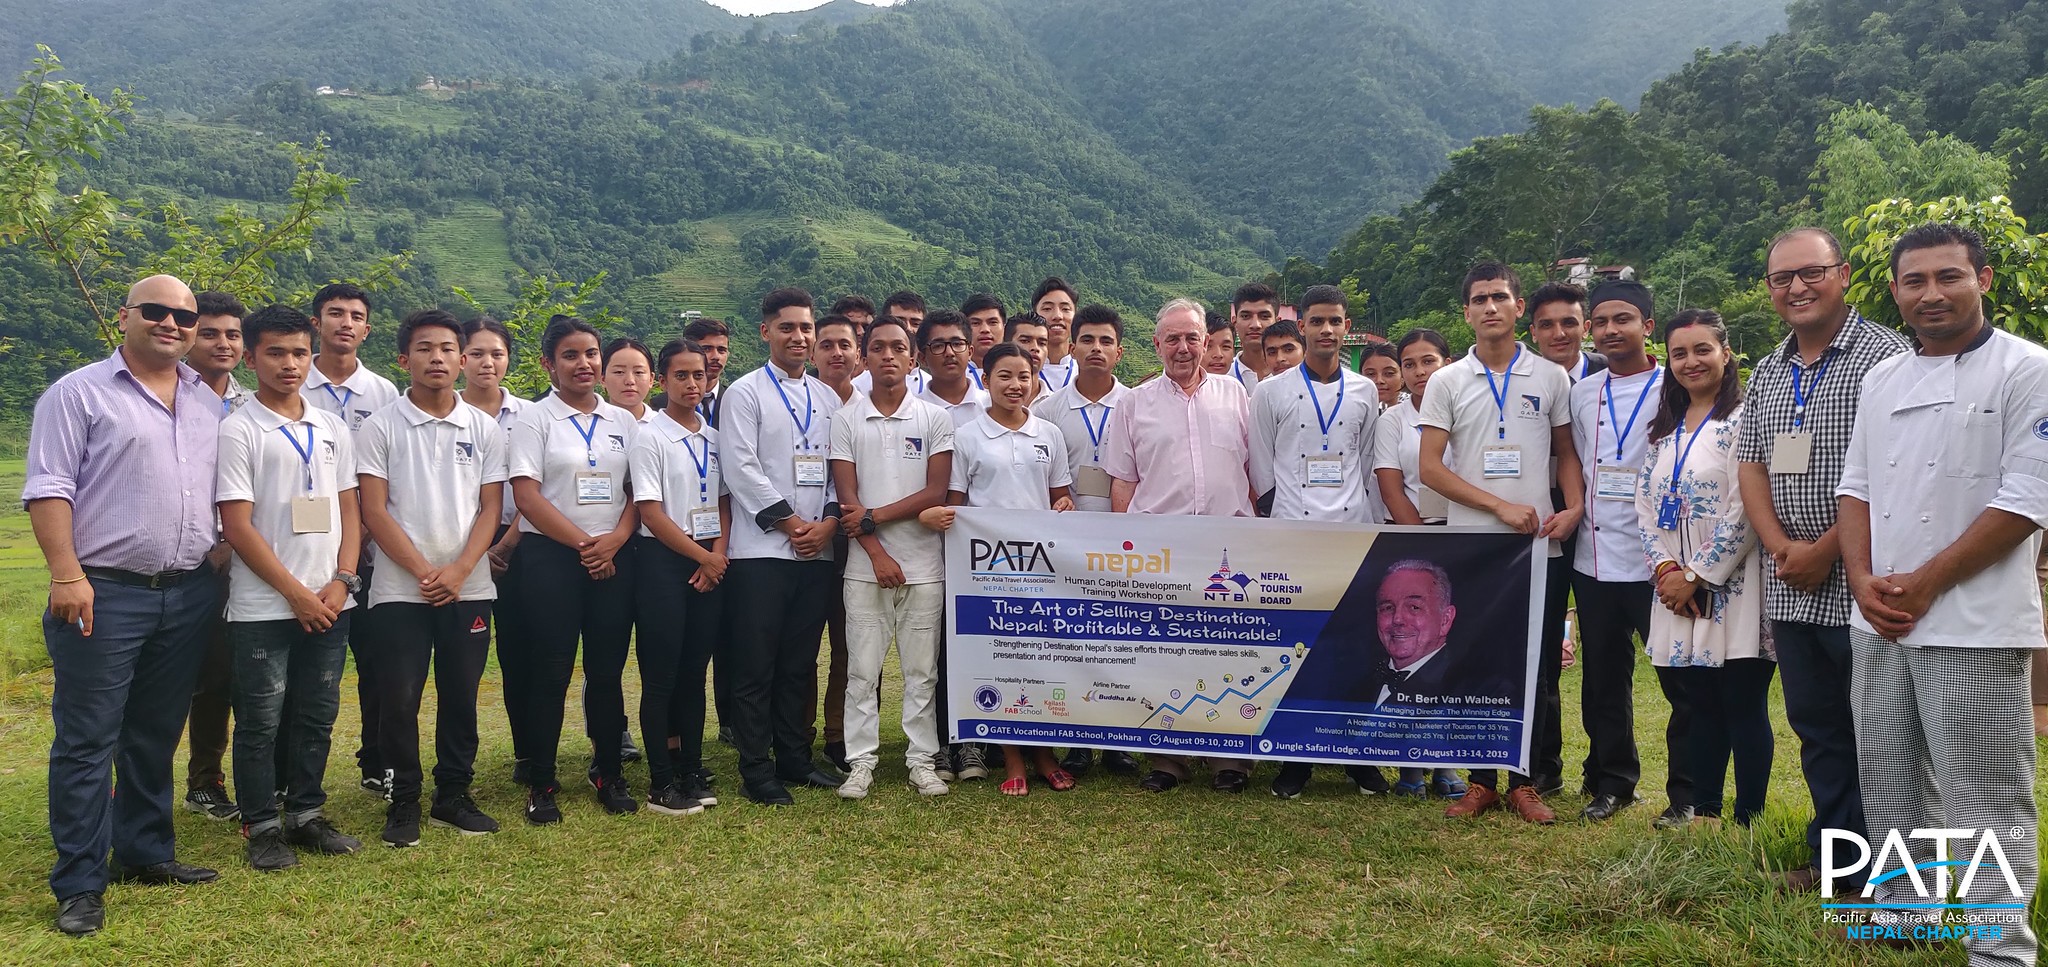 PATA Nepal Chapter organizes the Two-Day HCD Training Workshop on “The Art of Selling Destination” in Pokhara and Chitwan